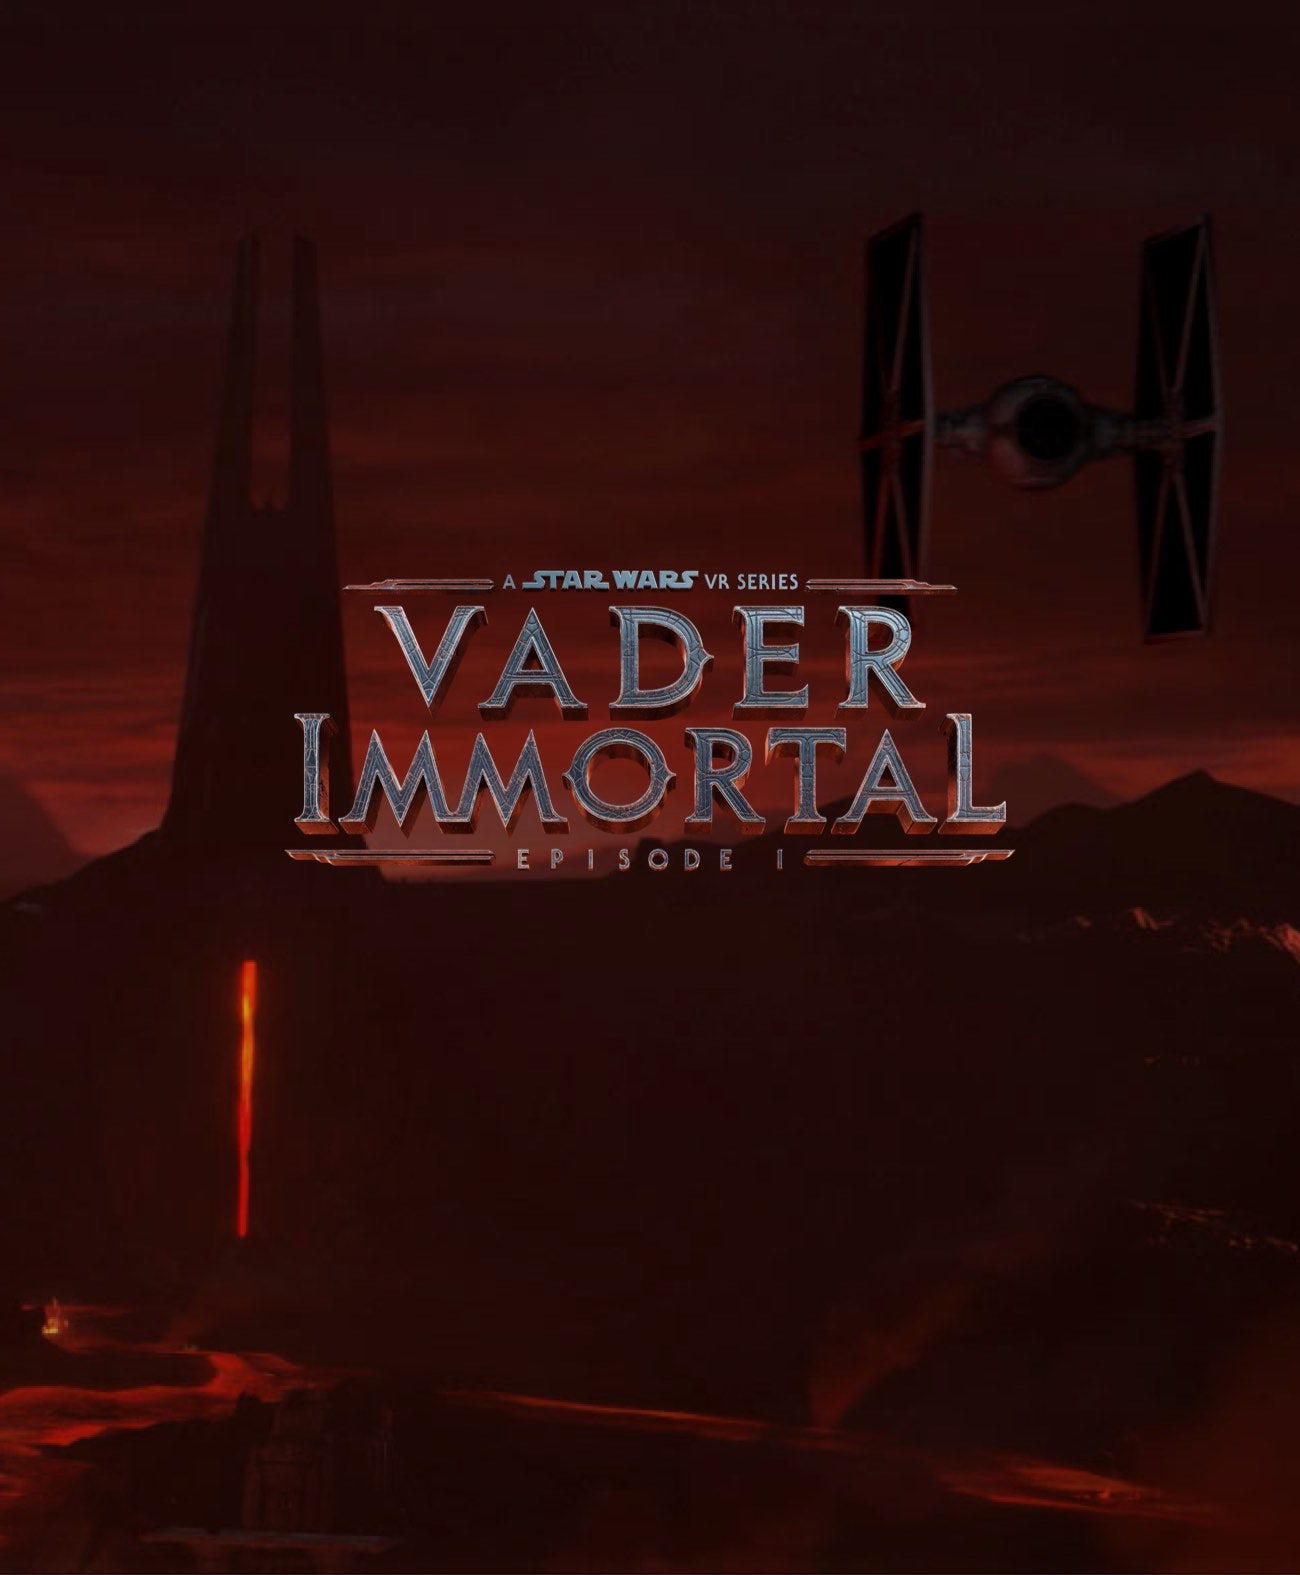 Image for Vader Immortal: A Star Wars VR Series trailer shows off the episodic title coming to Oculus